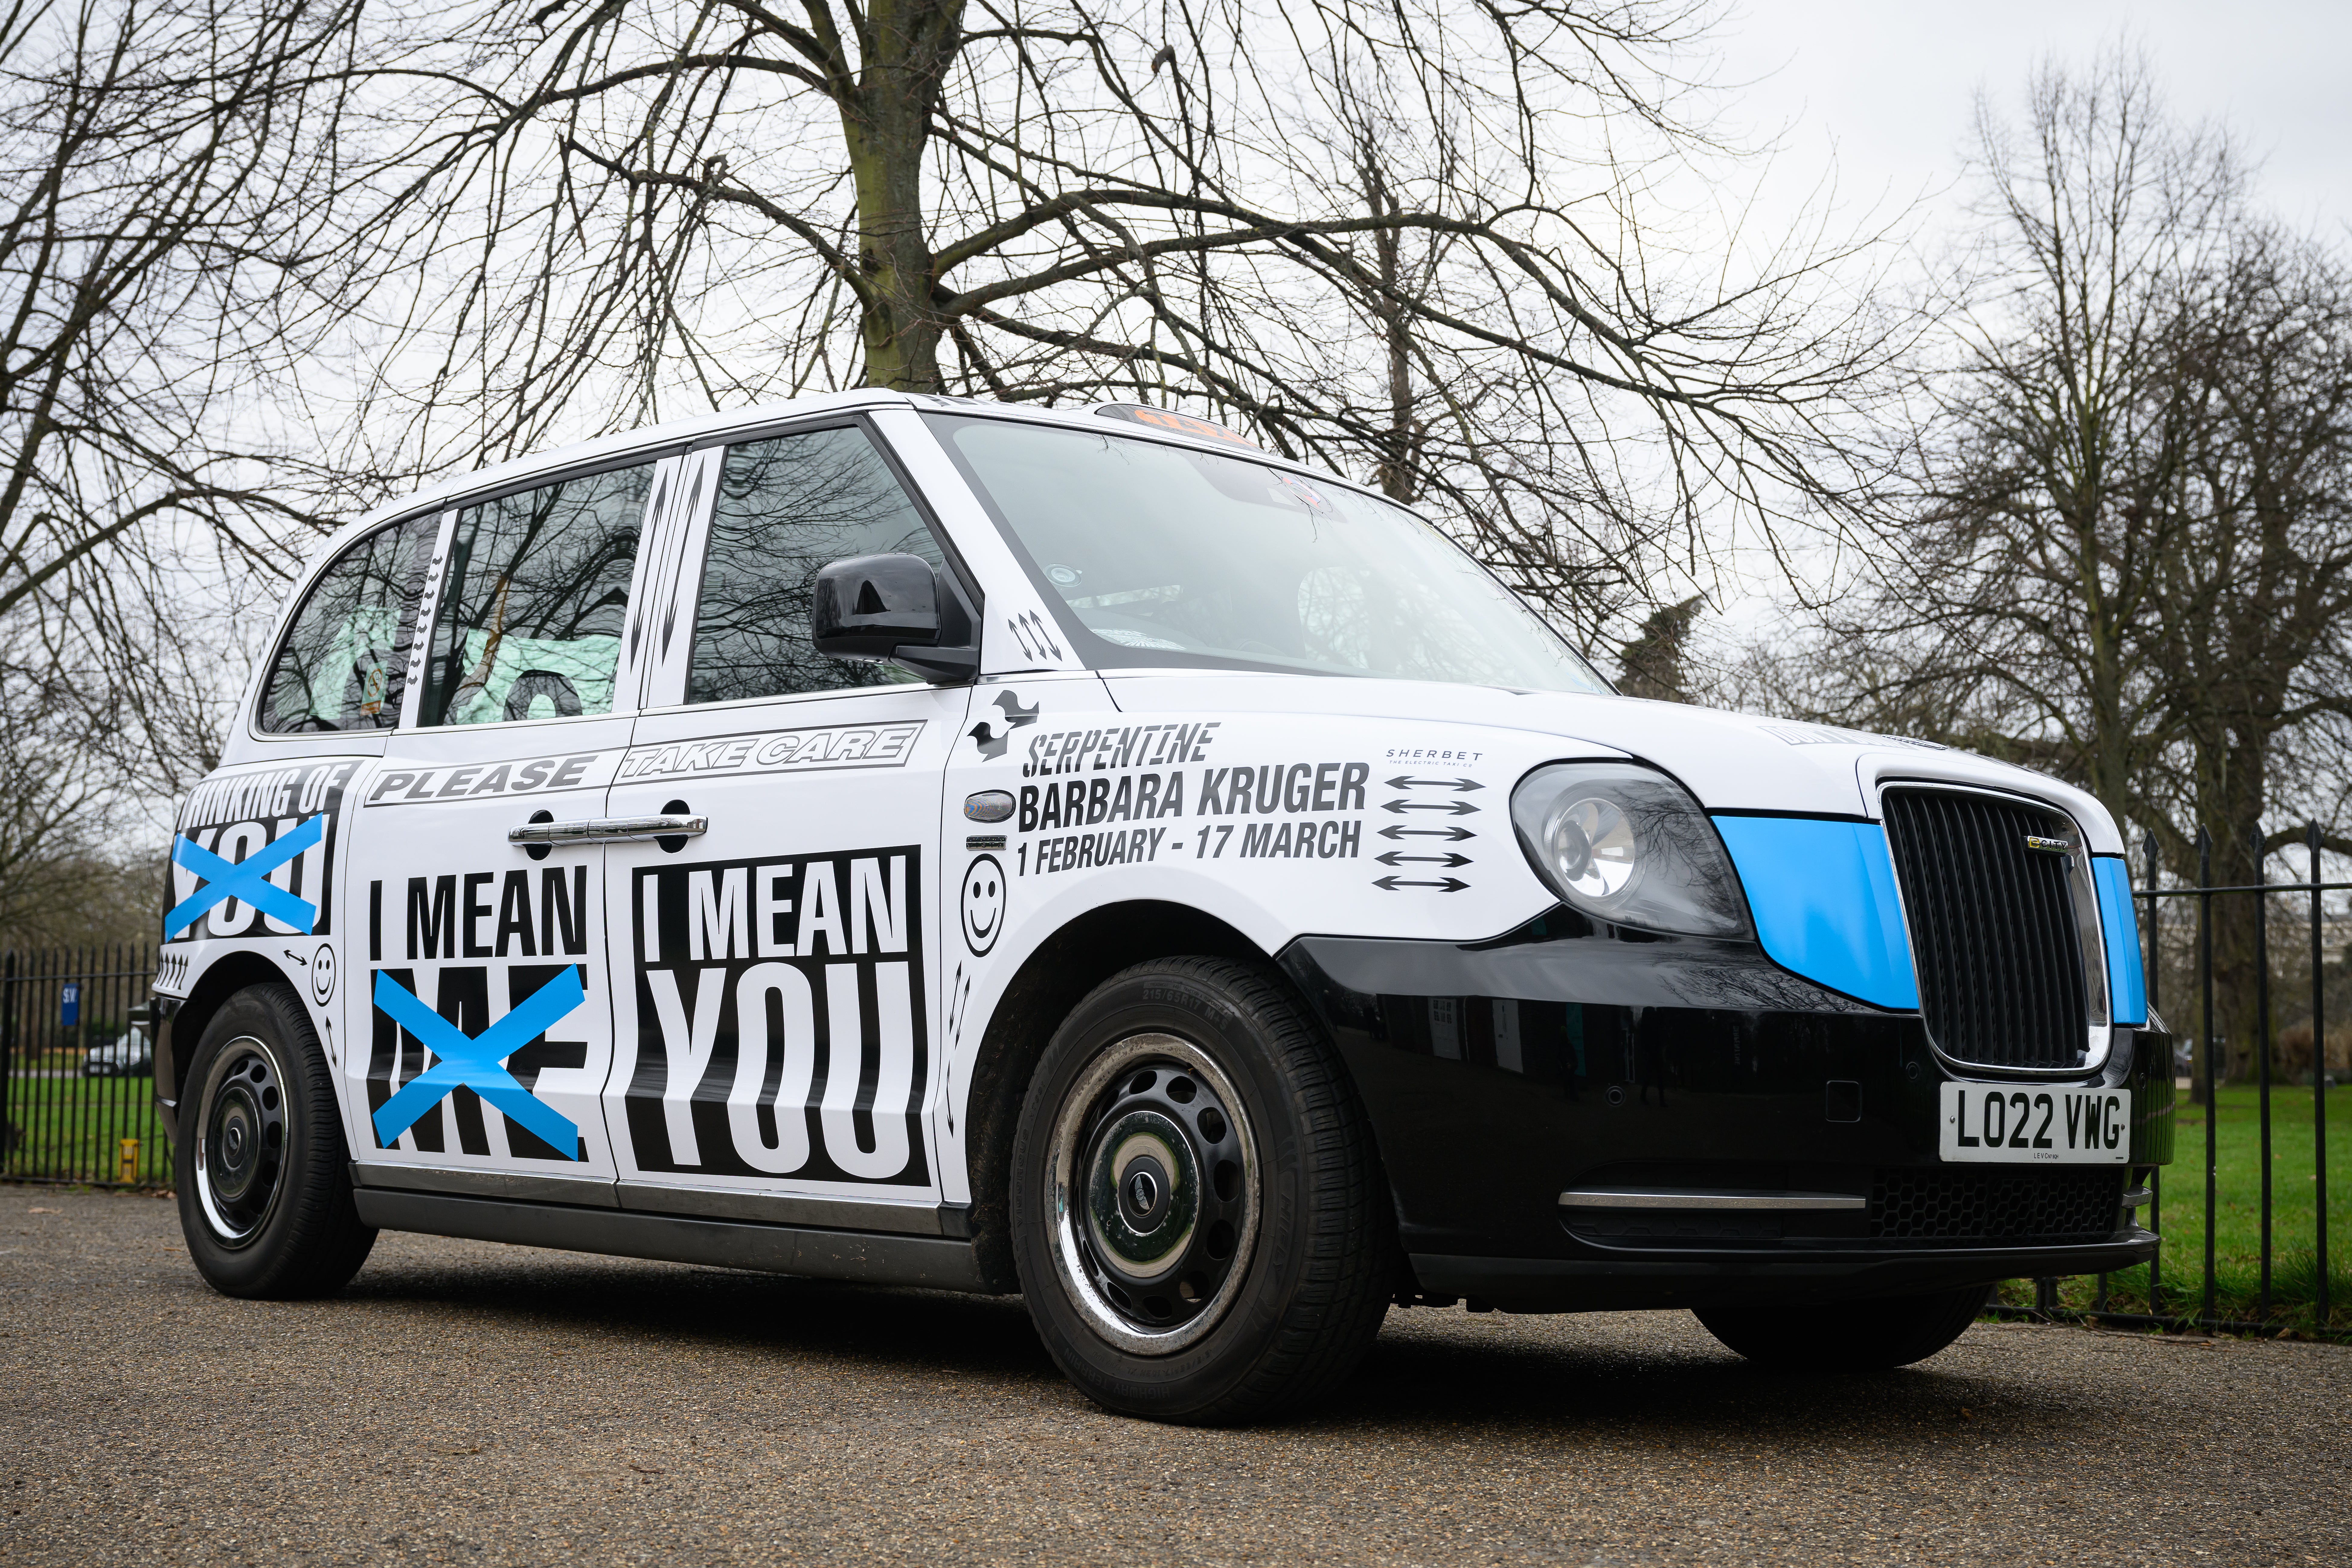 Black cabs across London are wrapped with Kruger’s art